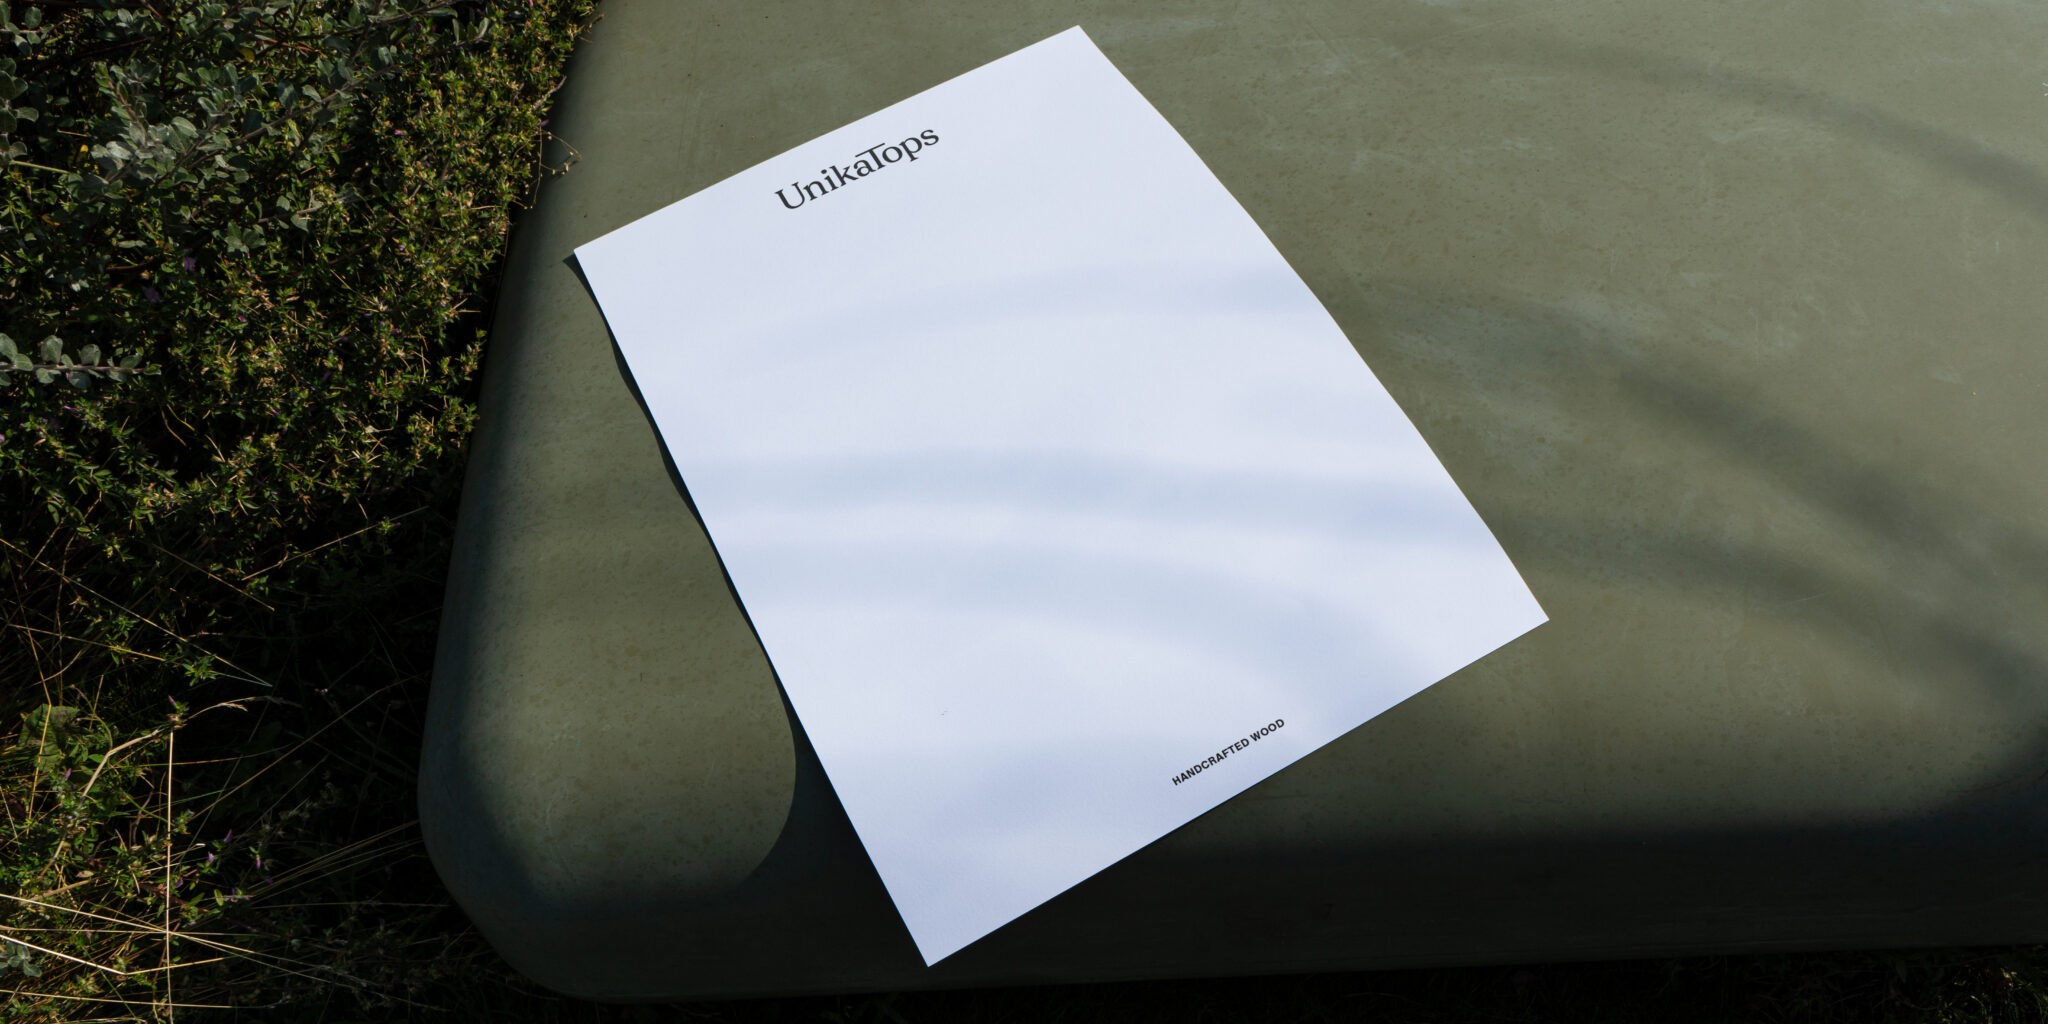 Letterhead design for UnikaTops as an example for brand assets